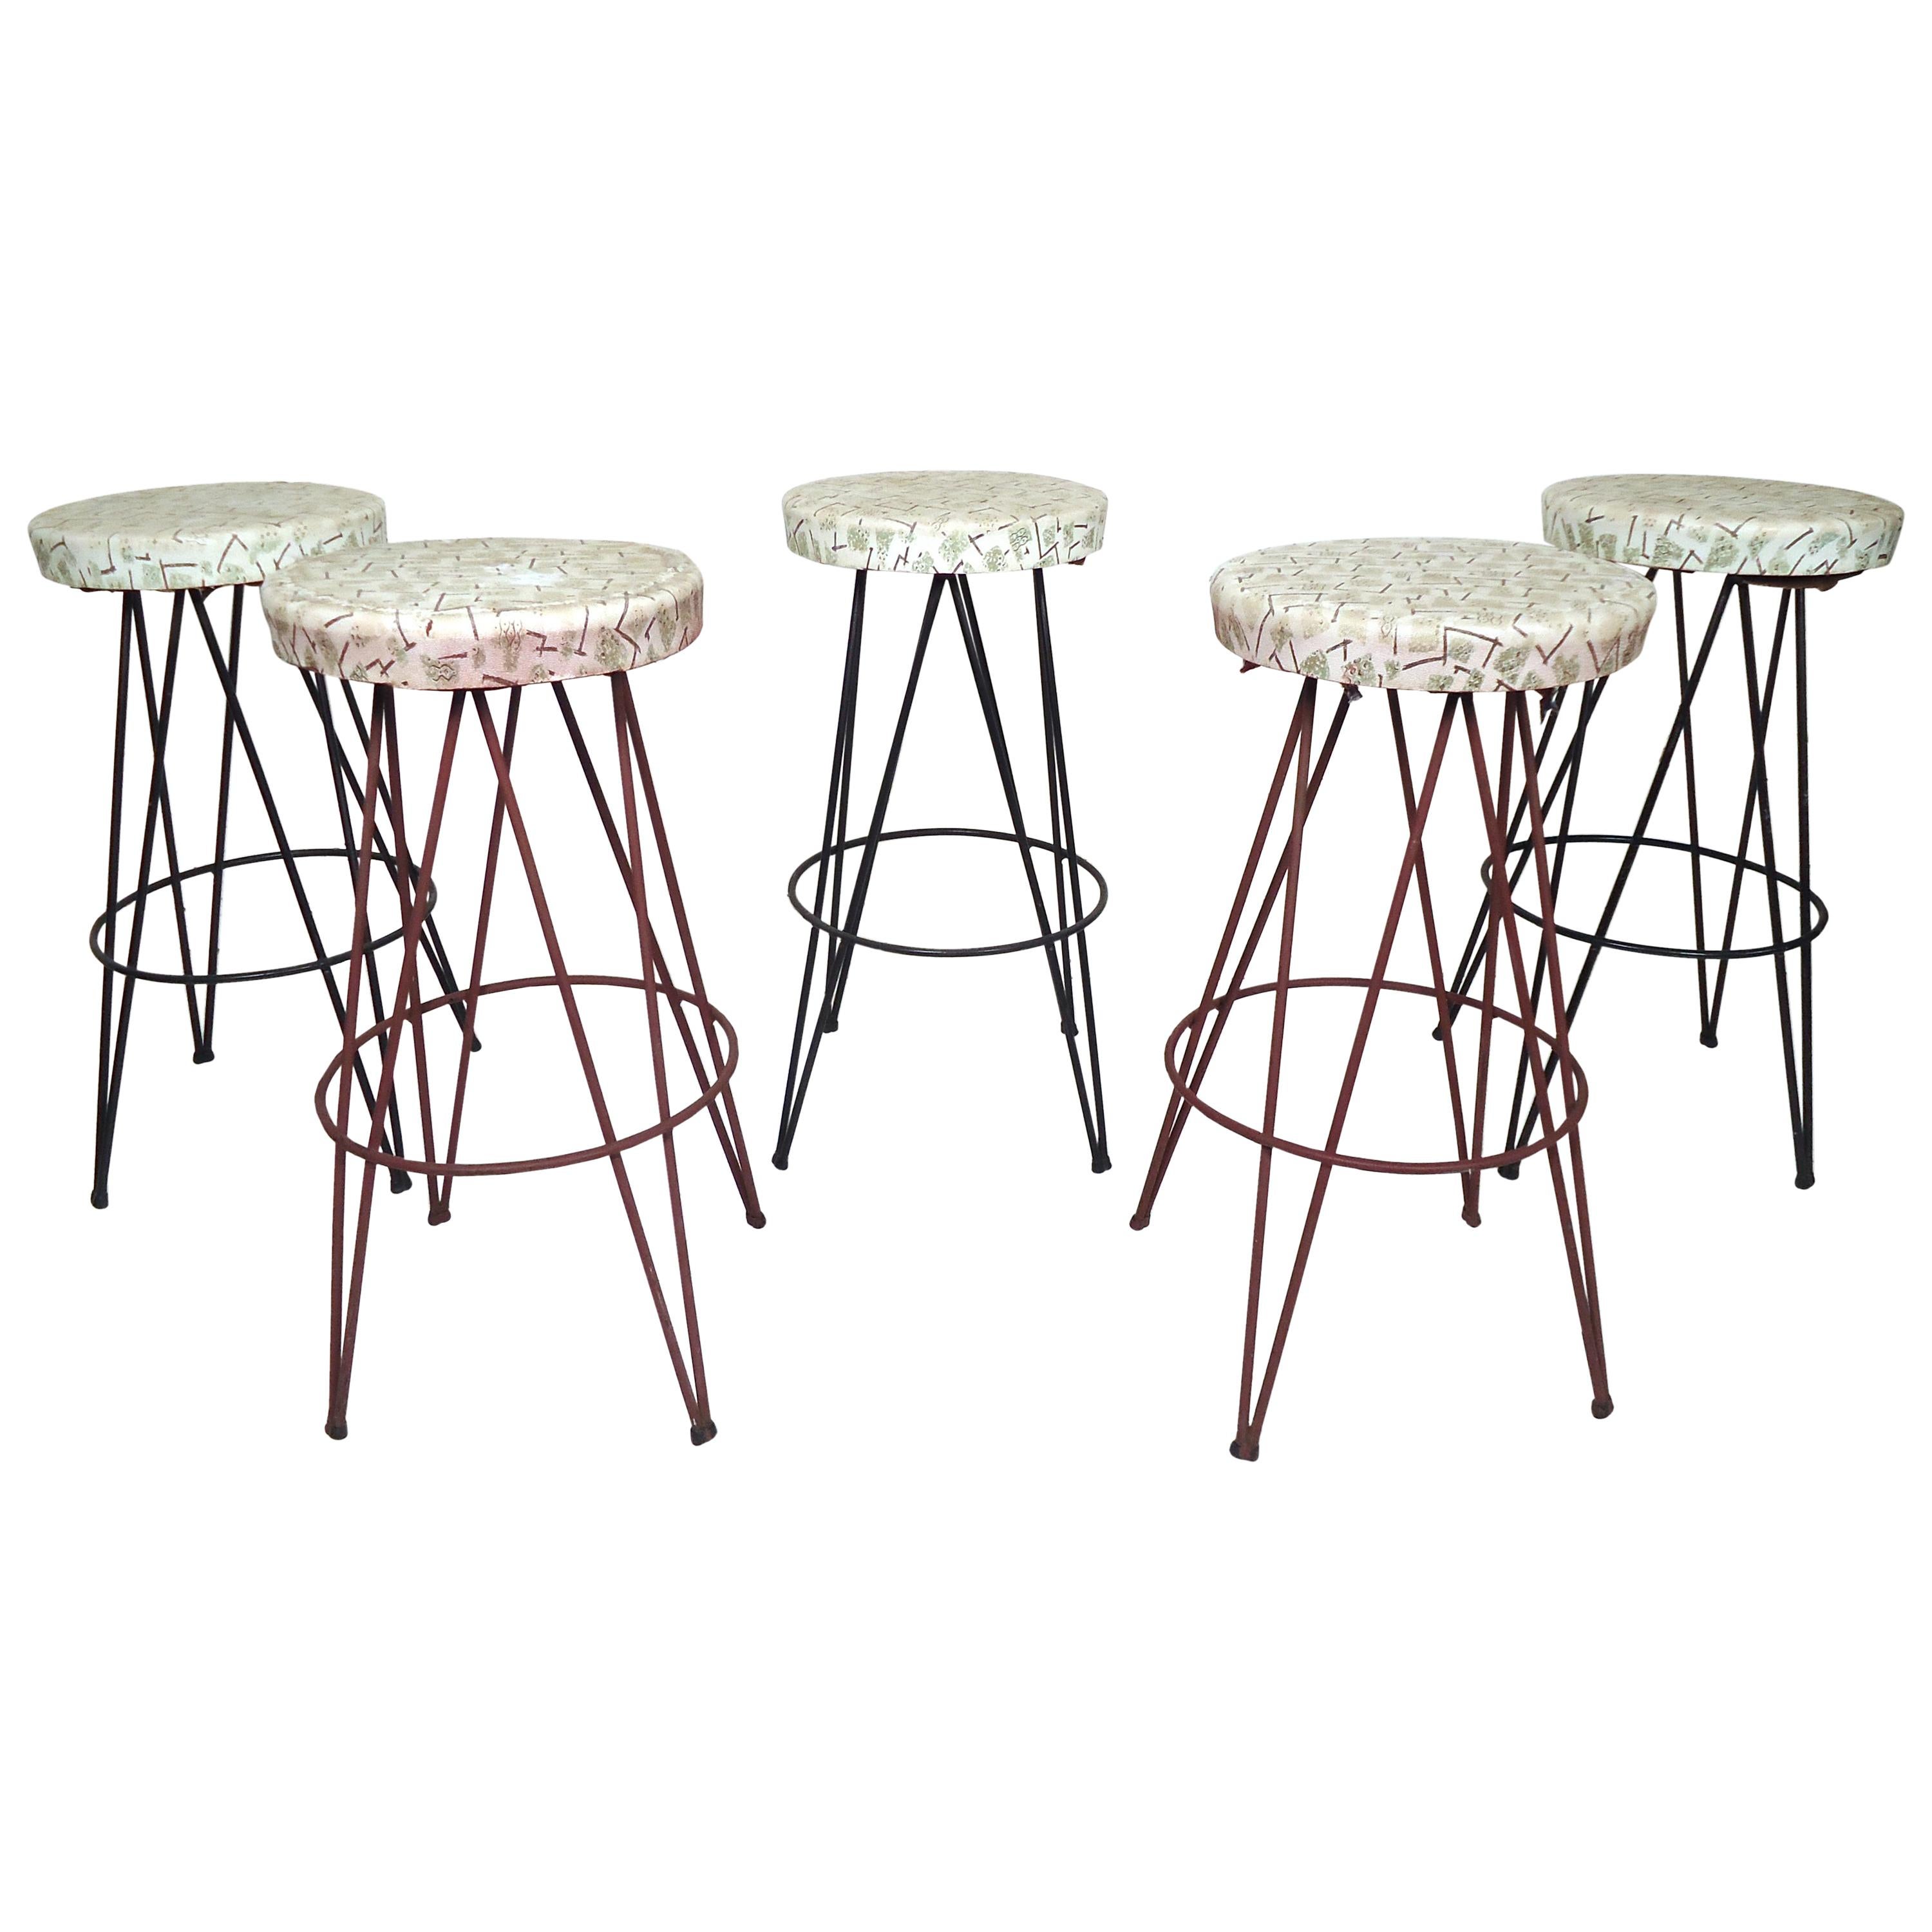 Vintage Stools with Hairpin Legs